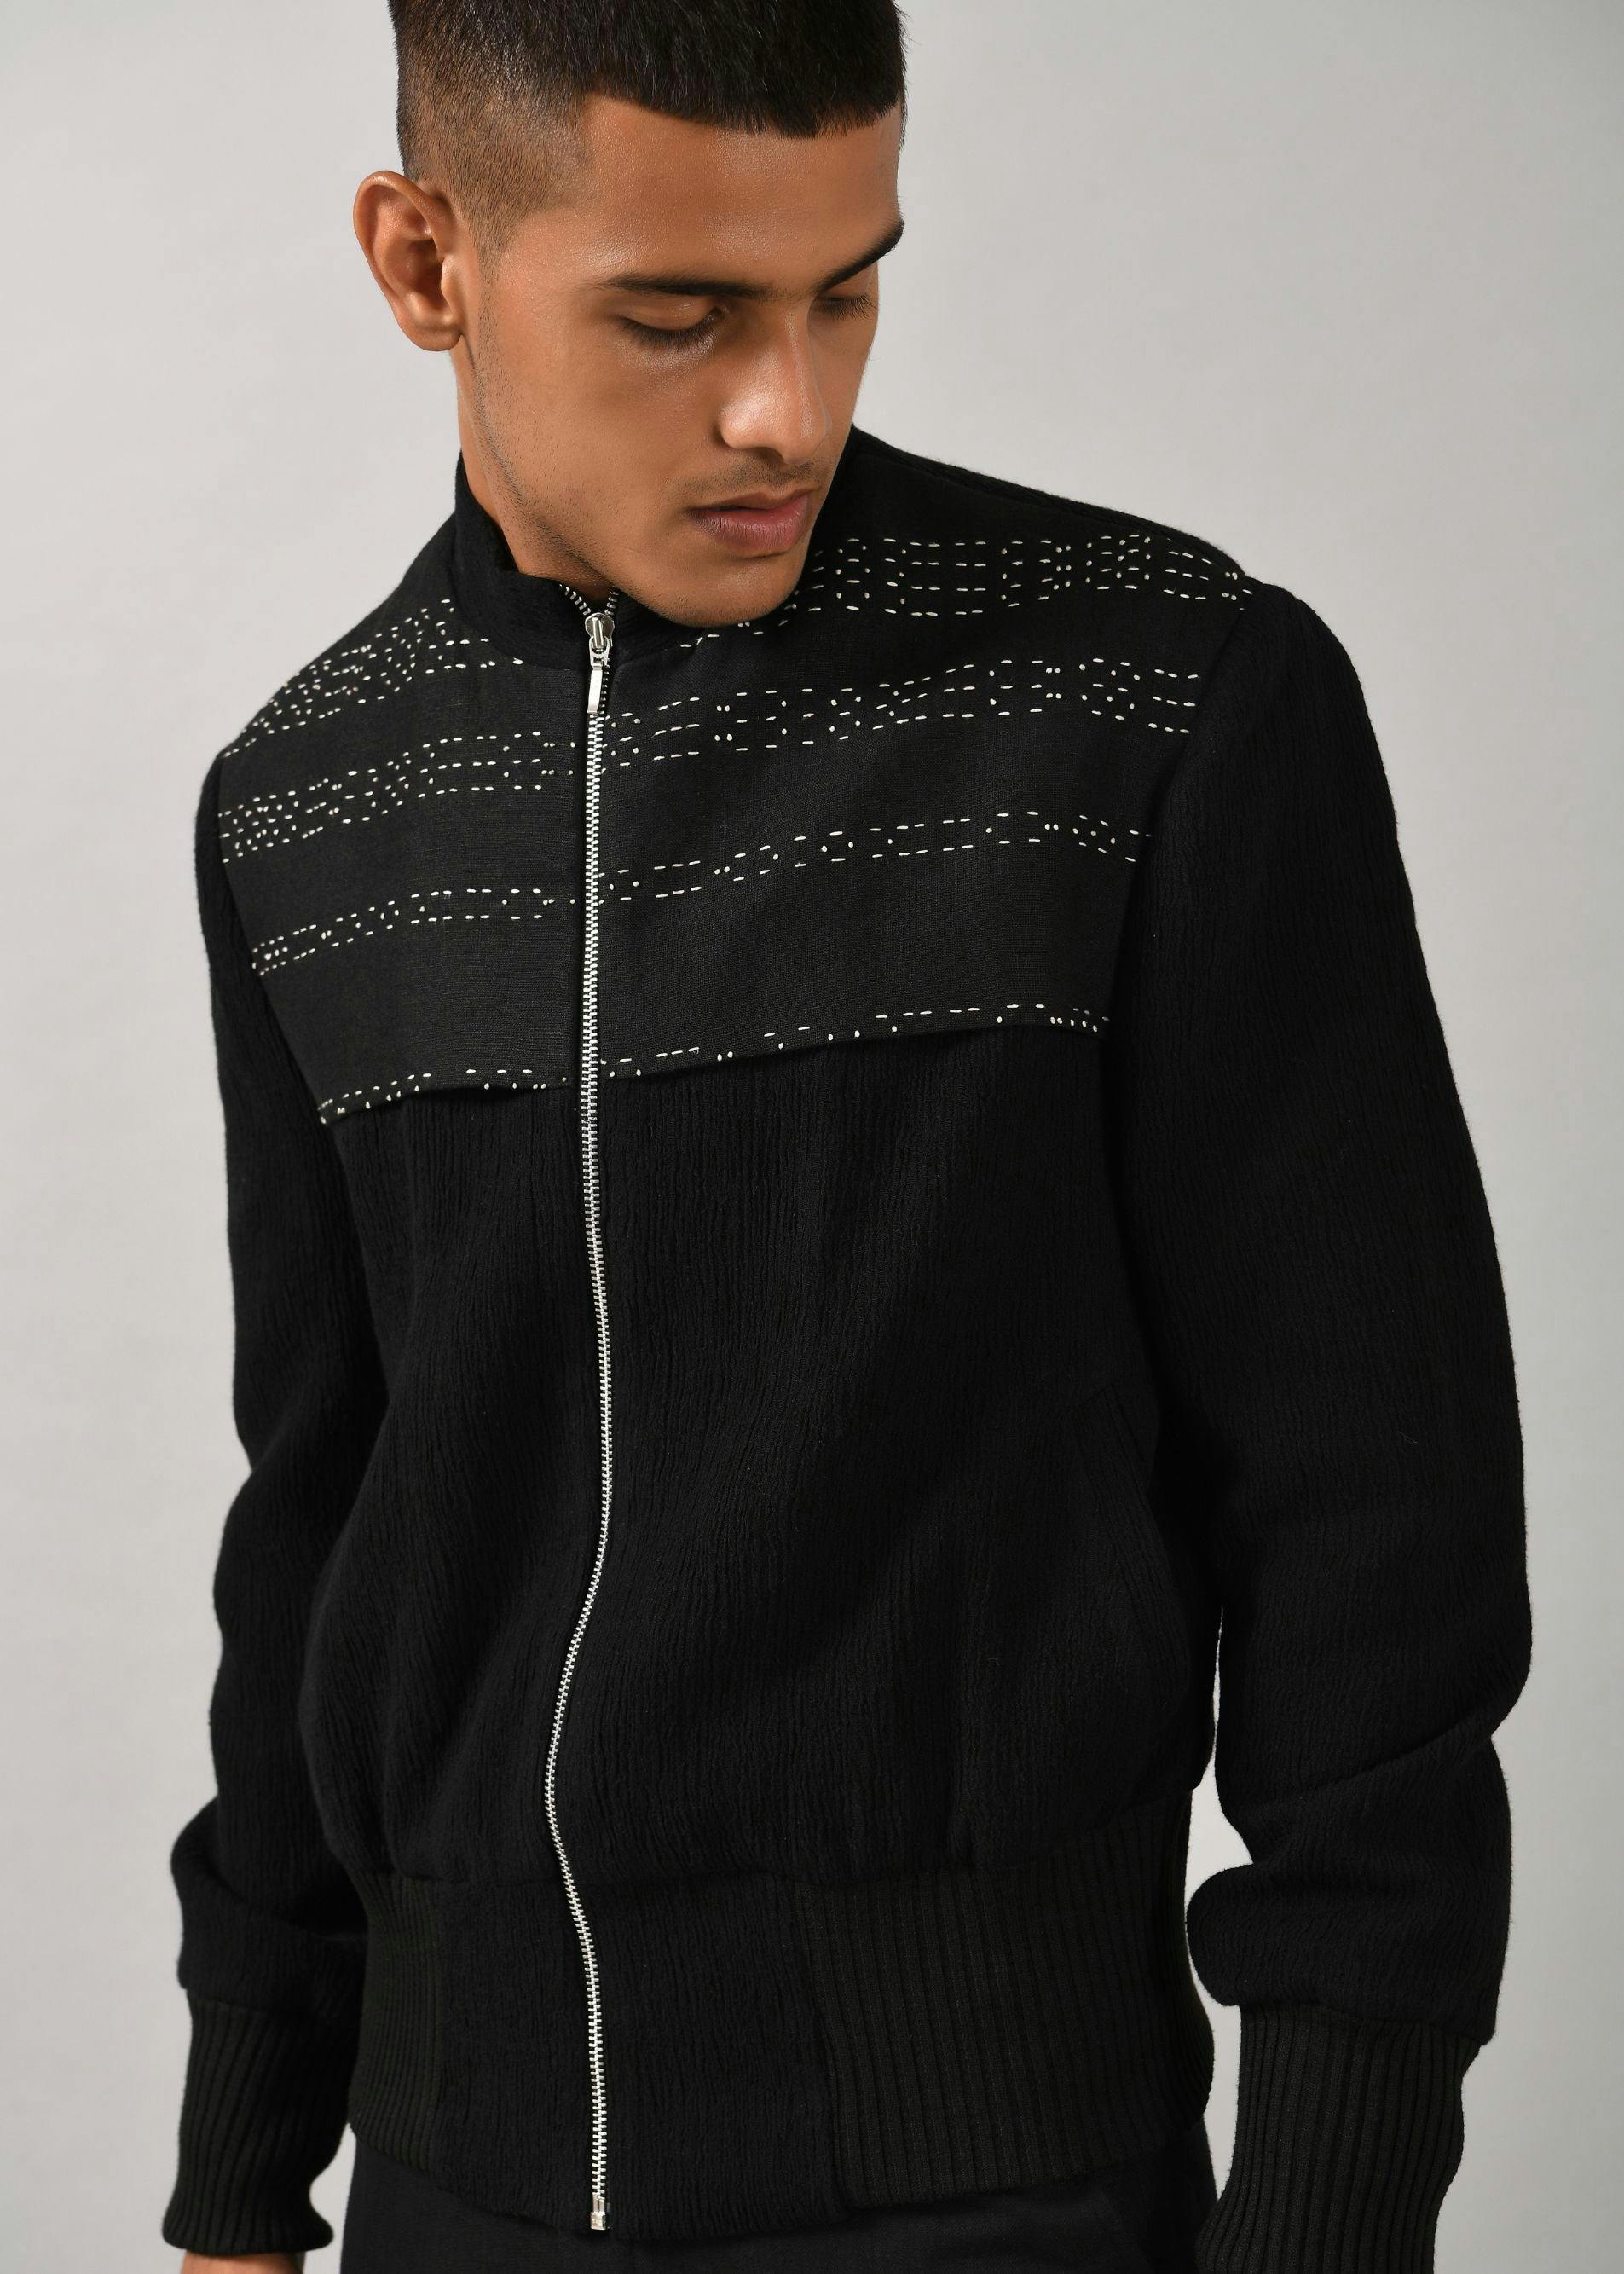 Morse Code Bomber Jacket, a product by Country Made